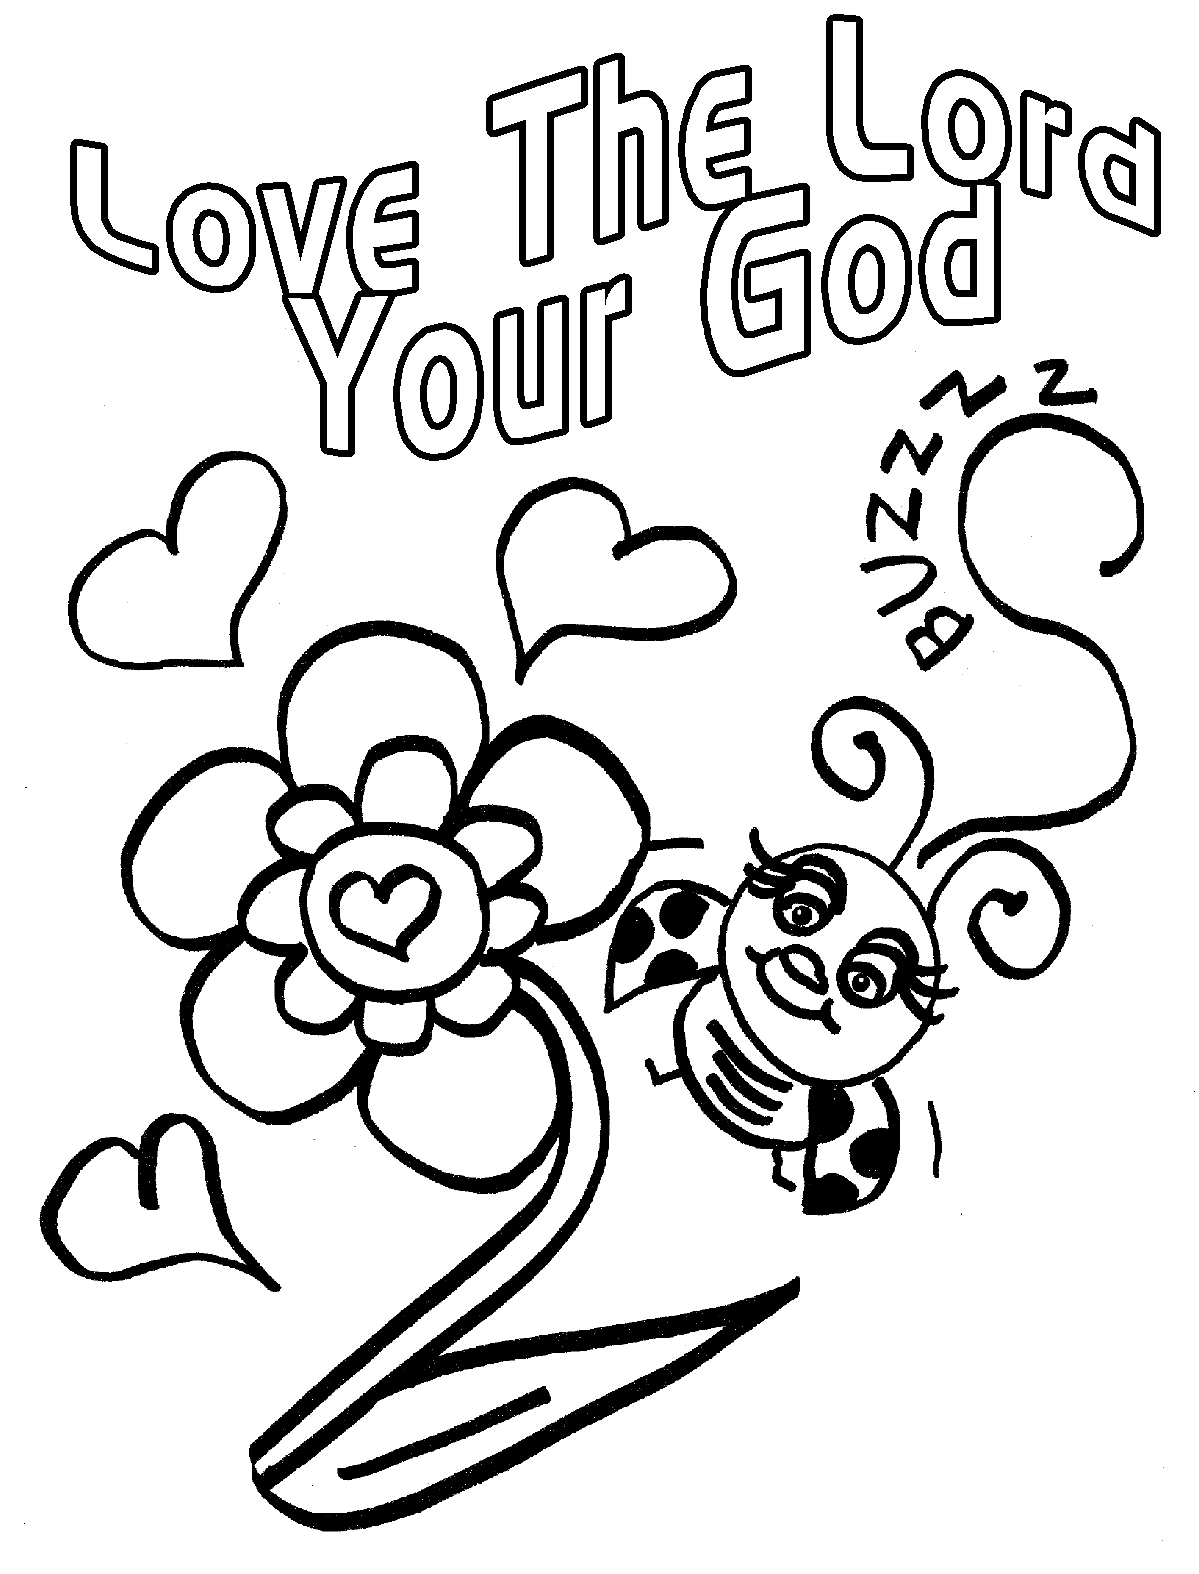 Love Bug For Jesus Coloring Pages